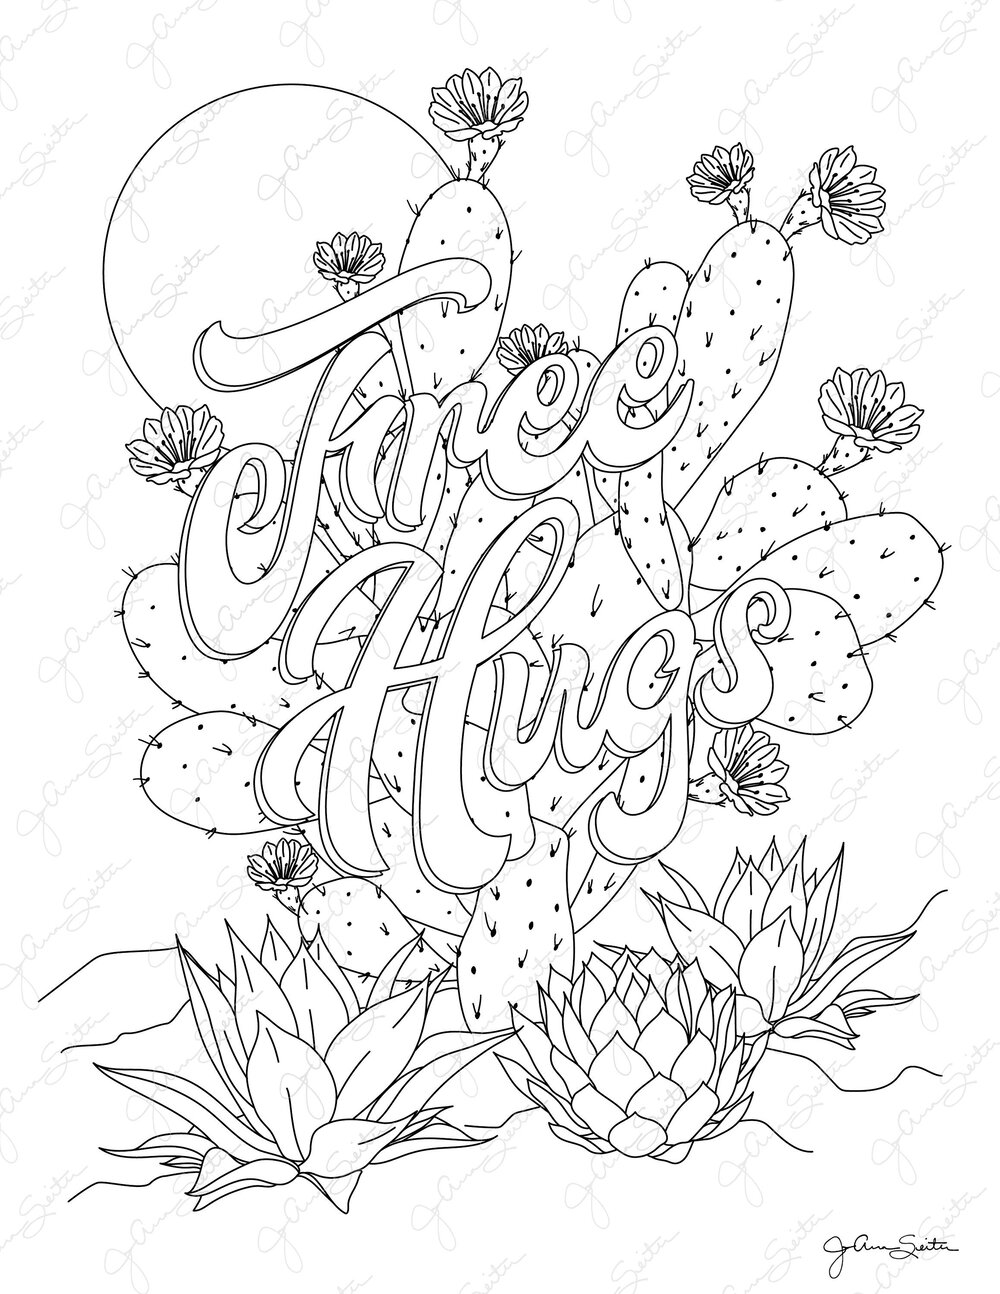 Printable Cactus Coloring Pages, Set of 3 Coloring Sheets for Grown Ups —  JoAnna Seiter